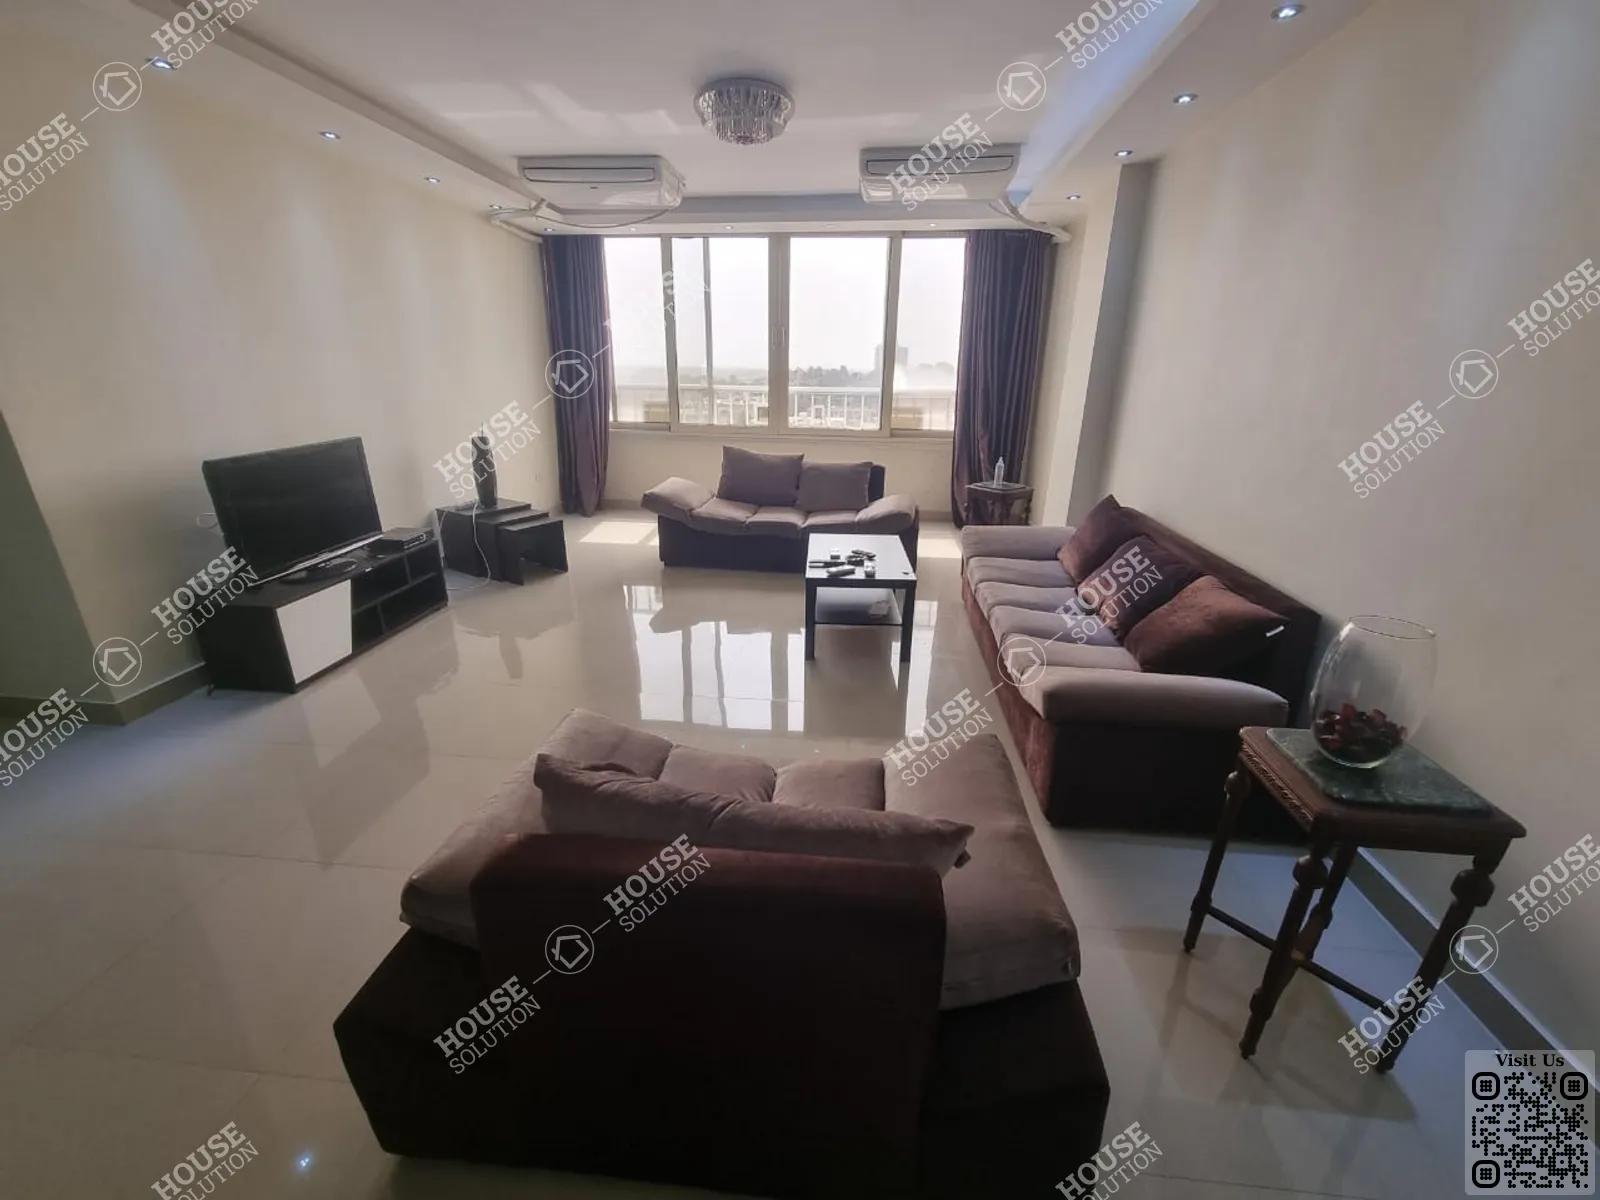 RECEPTION  @ Apartments For Rent In Maadi Maadi Sarayat Area: 180 m² consists of 3 Bedrooms 2 Bathrooms Modern furnished 5 stars #5410-0